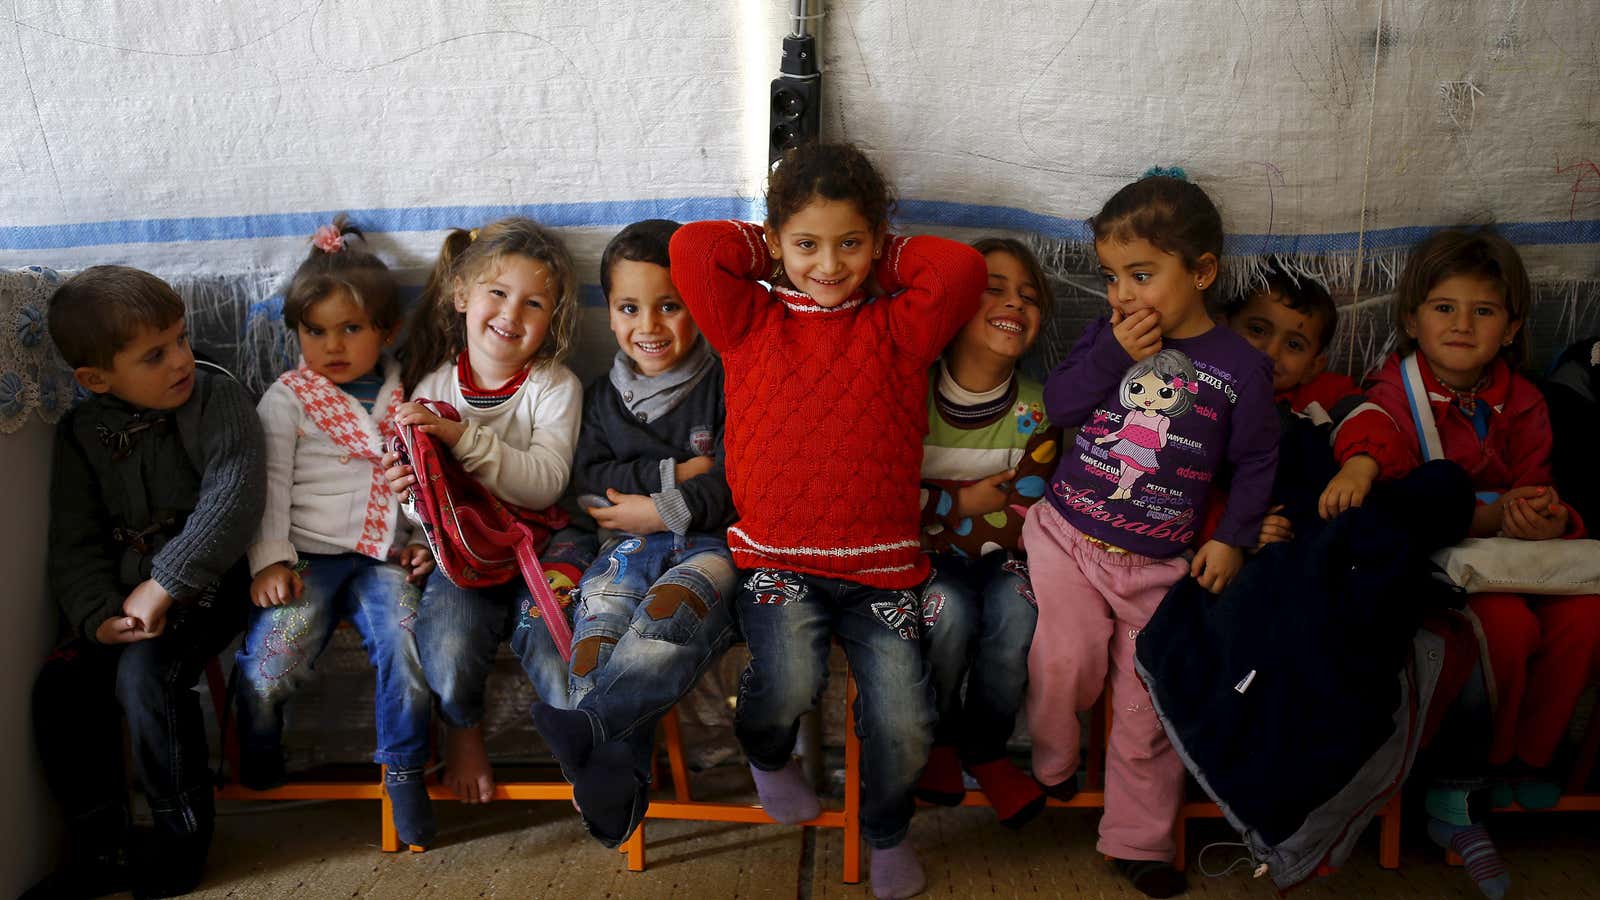 More than 2 million Syrian children are currently out of school.